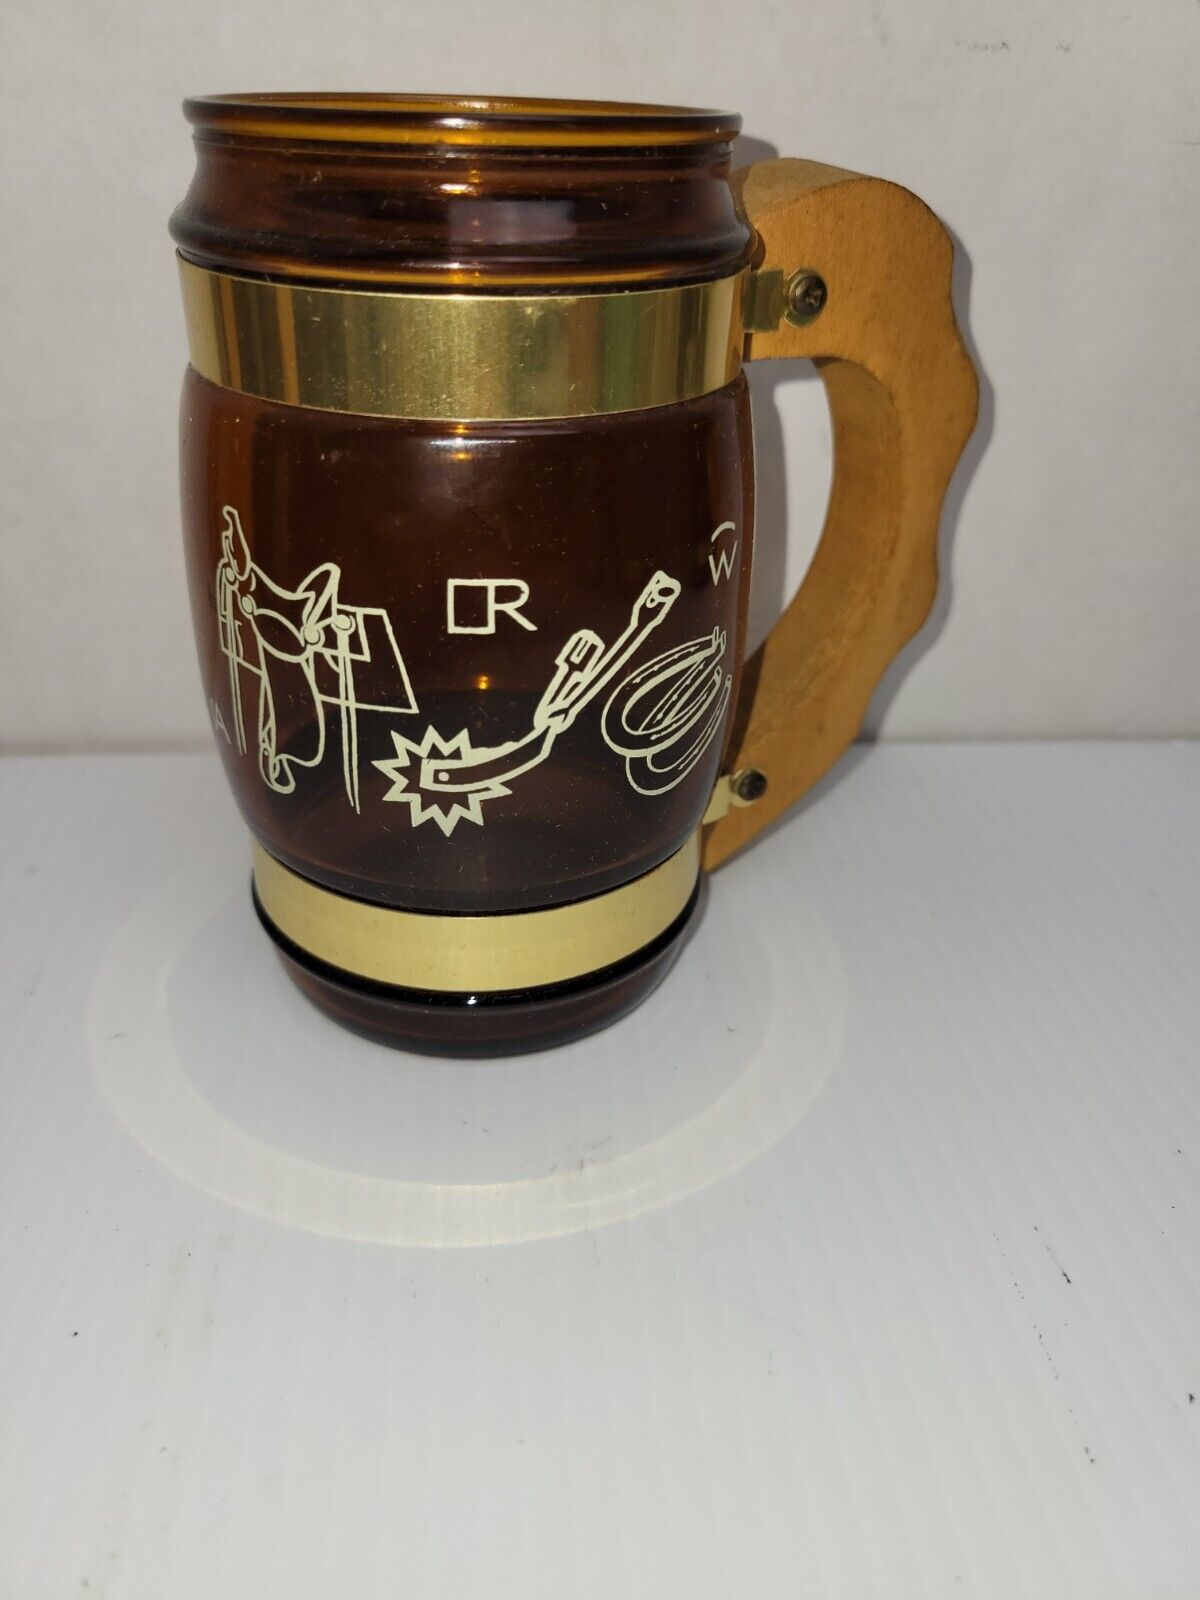 Siesta Ware Cowboy Western Drinking Mug with a Saddle, Spurs and horse 16oz